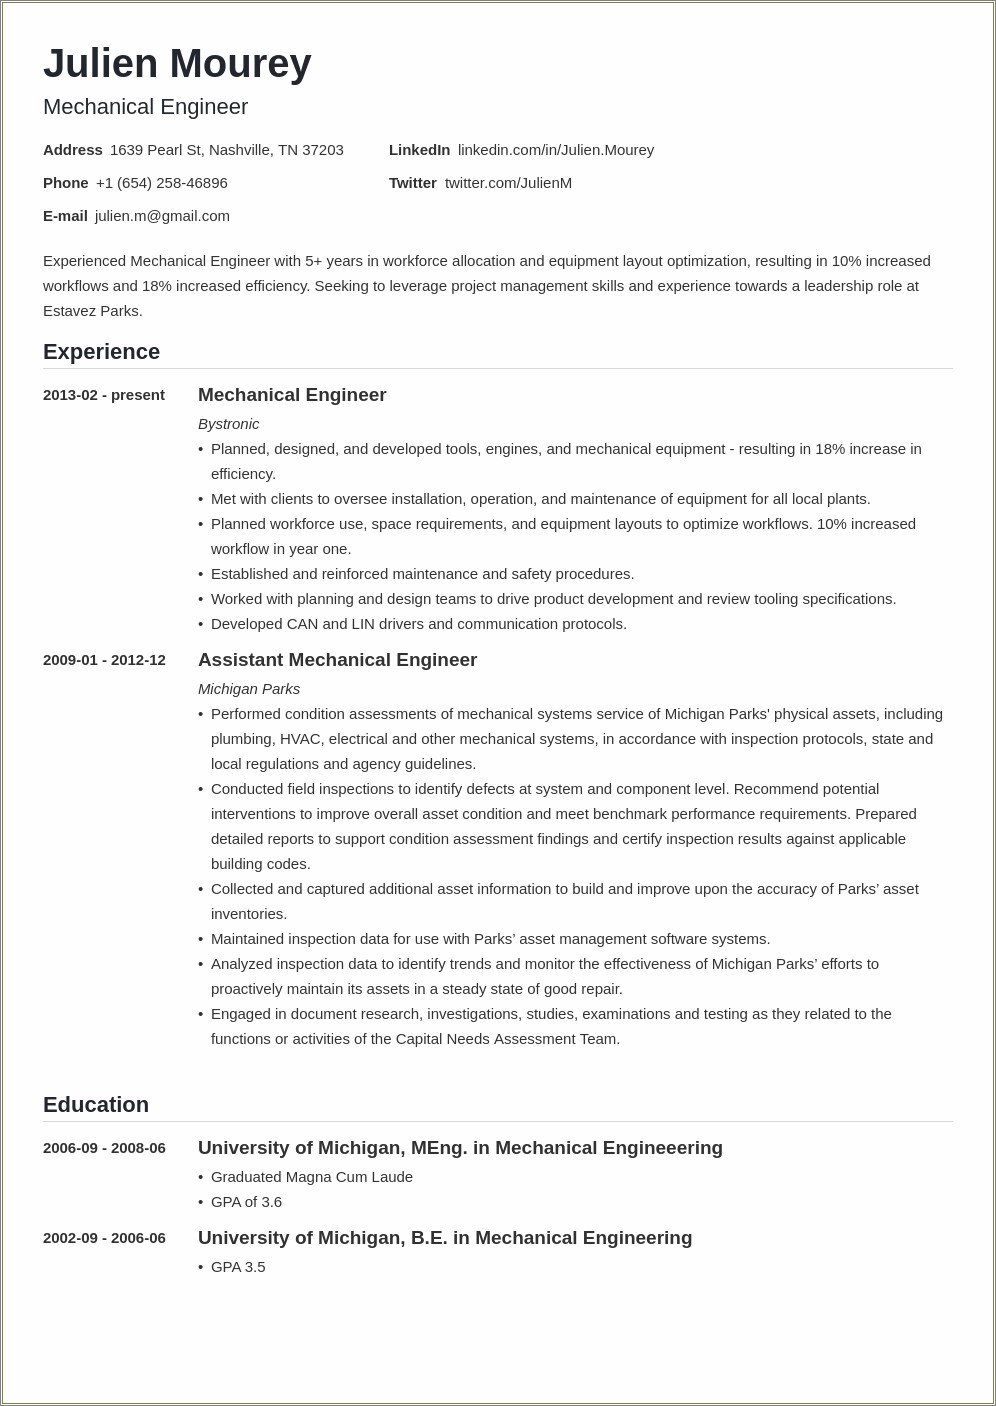 Resumes Summary For A Student Mechanicl Engineer